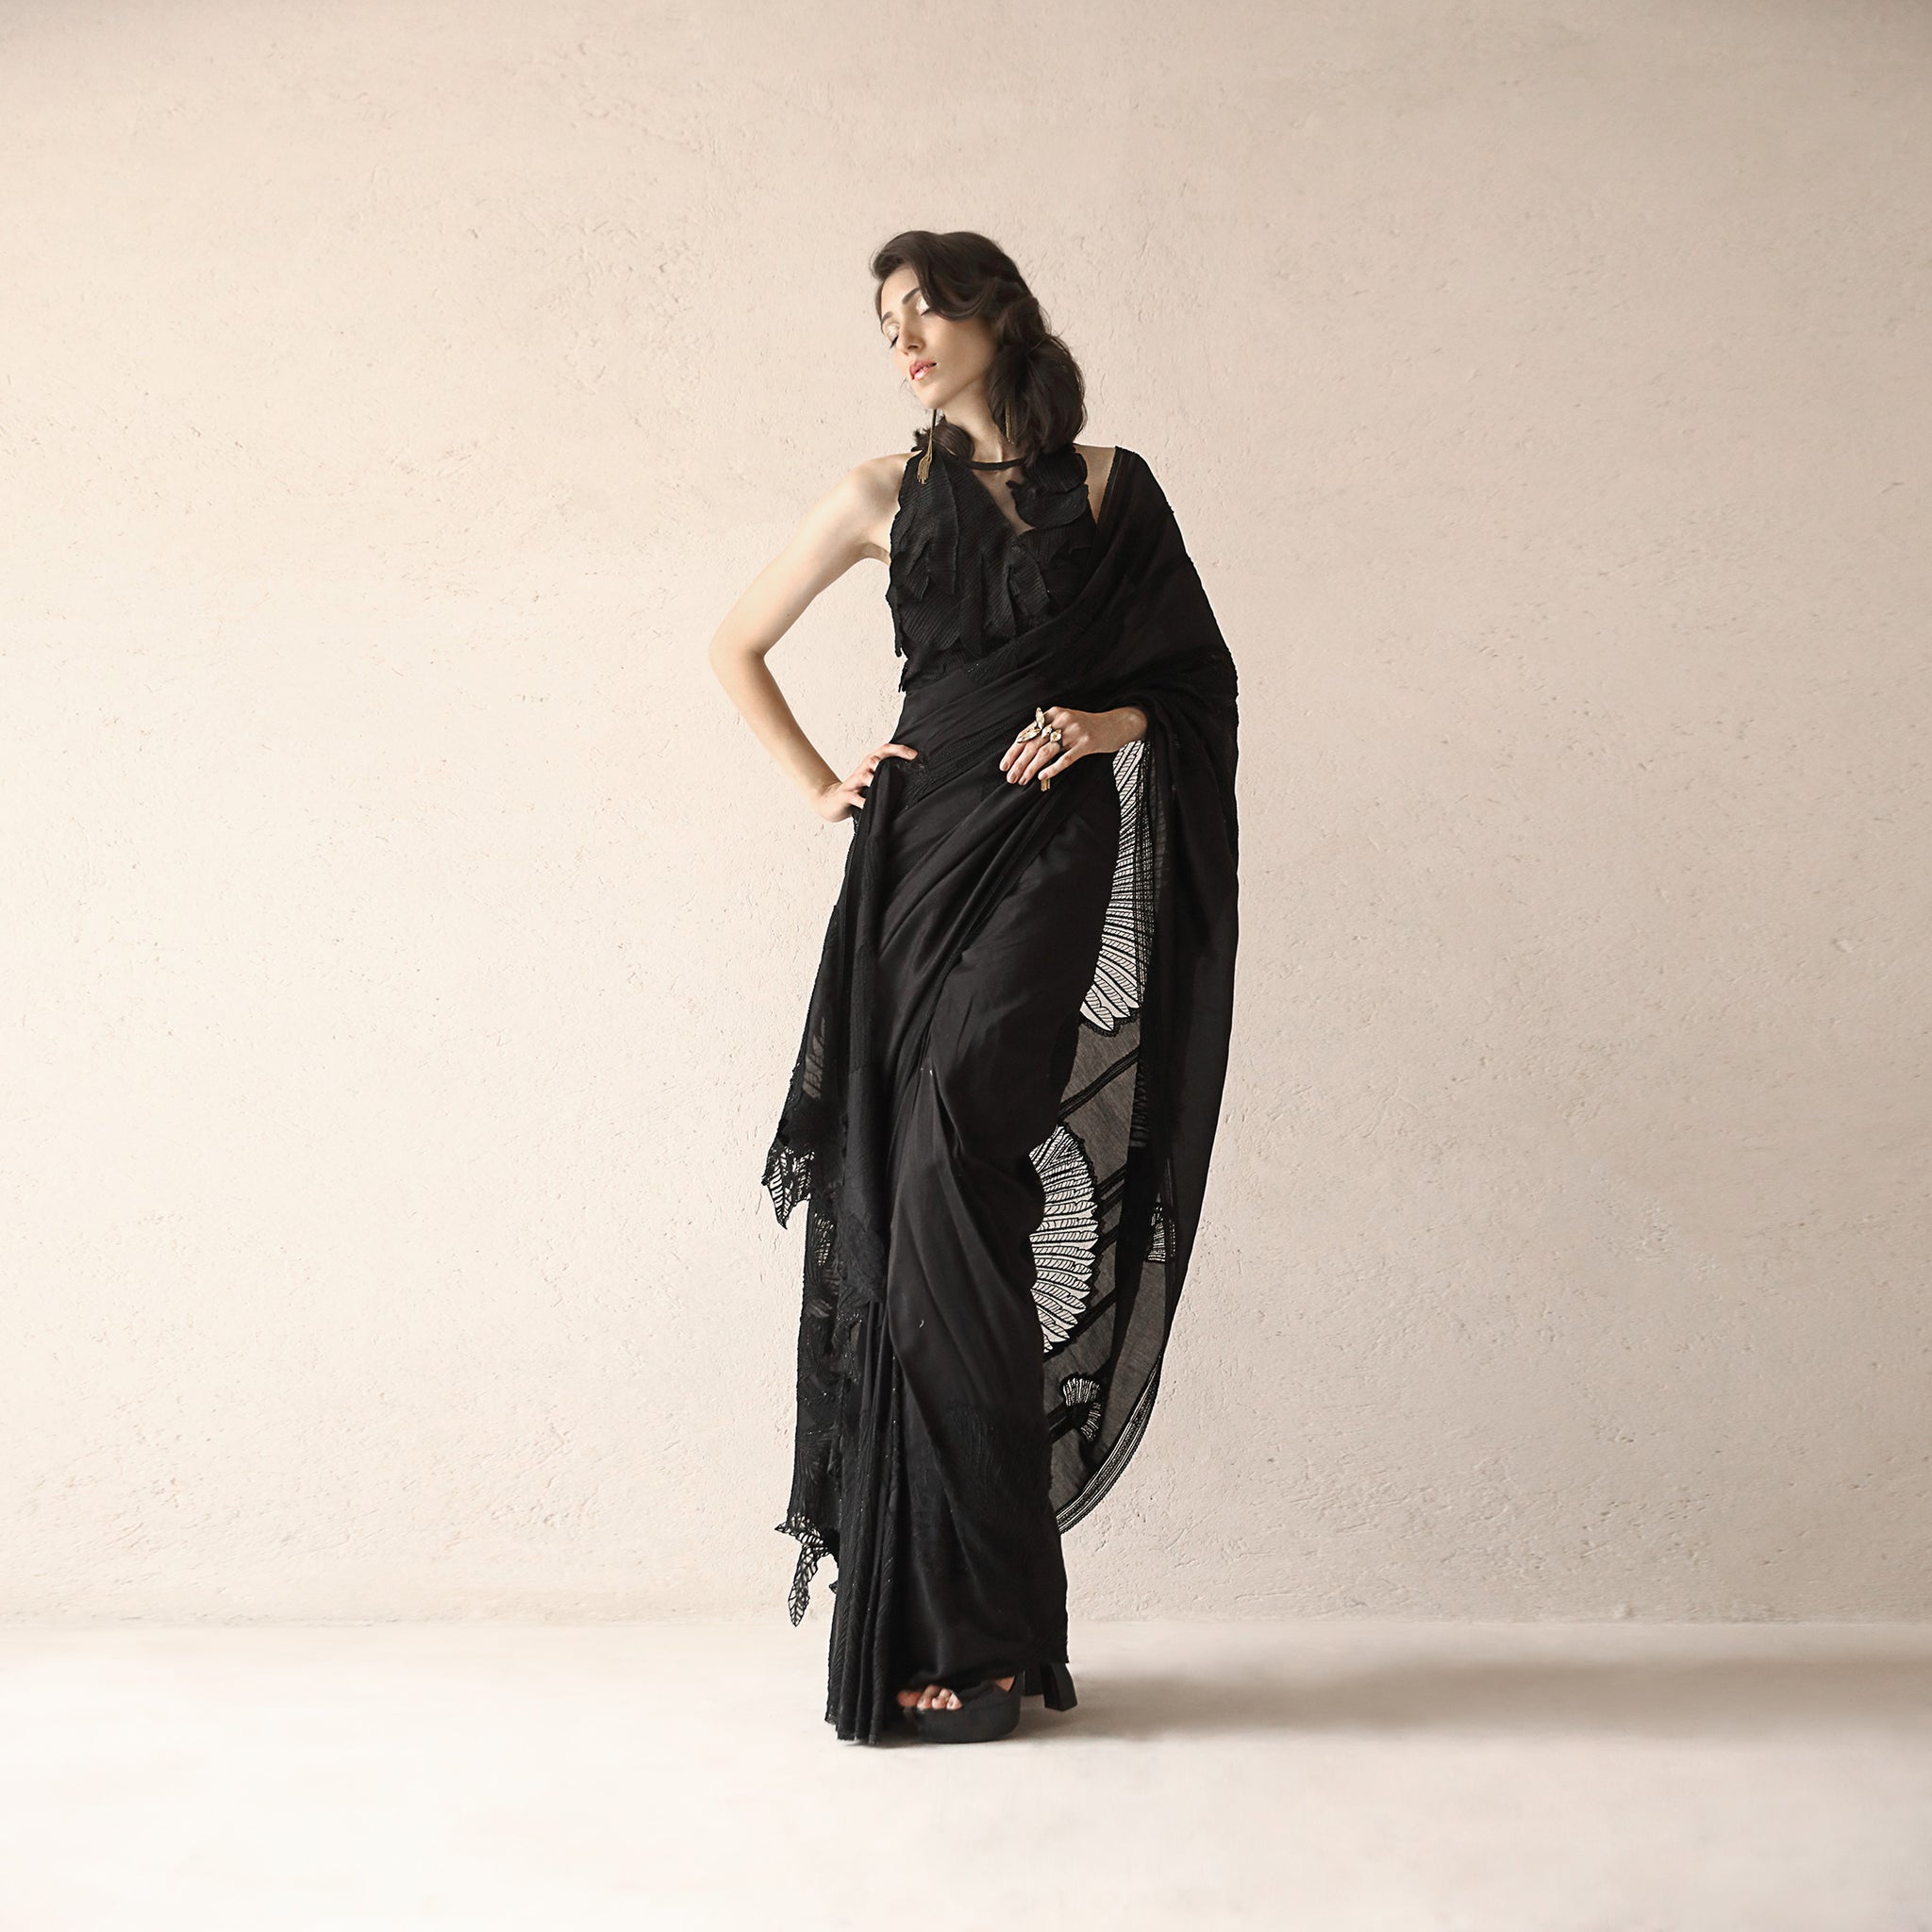 Chanderi Saree with fine Resham and net applique placement embroidery creating a beautiful balance between elegance and style. There is an interesting play of 3D textured draped embroidered blouse balancing the floral feel of the saree making it a  perfect pick for the evening. #Abhishekstudio #abhisheksharma  #fashiondesignerabhisheksharma #designerware #ambawattaone #lakmefashionweek #Saree